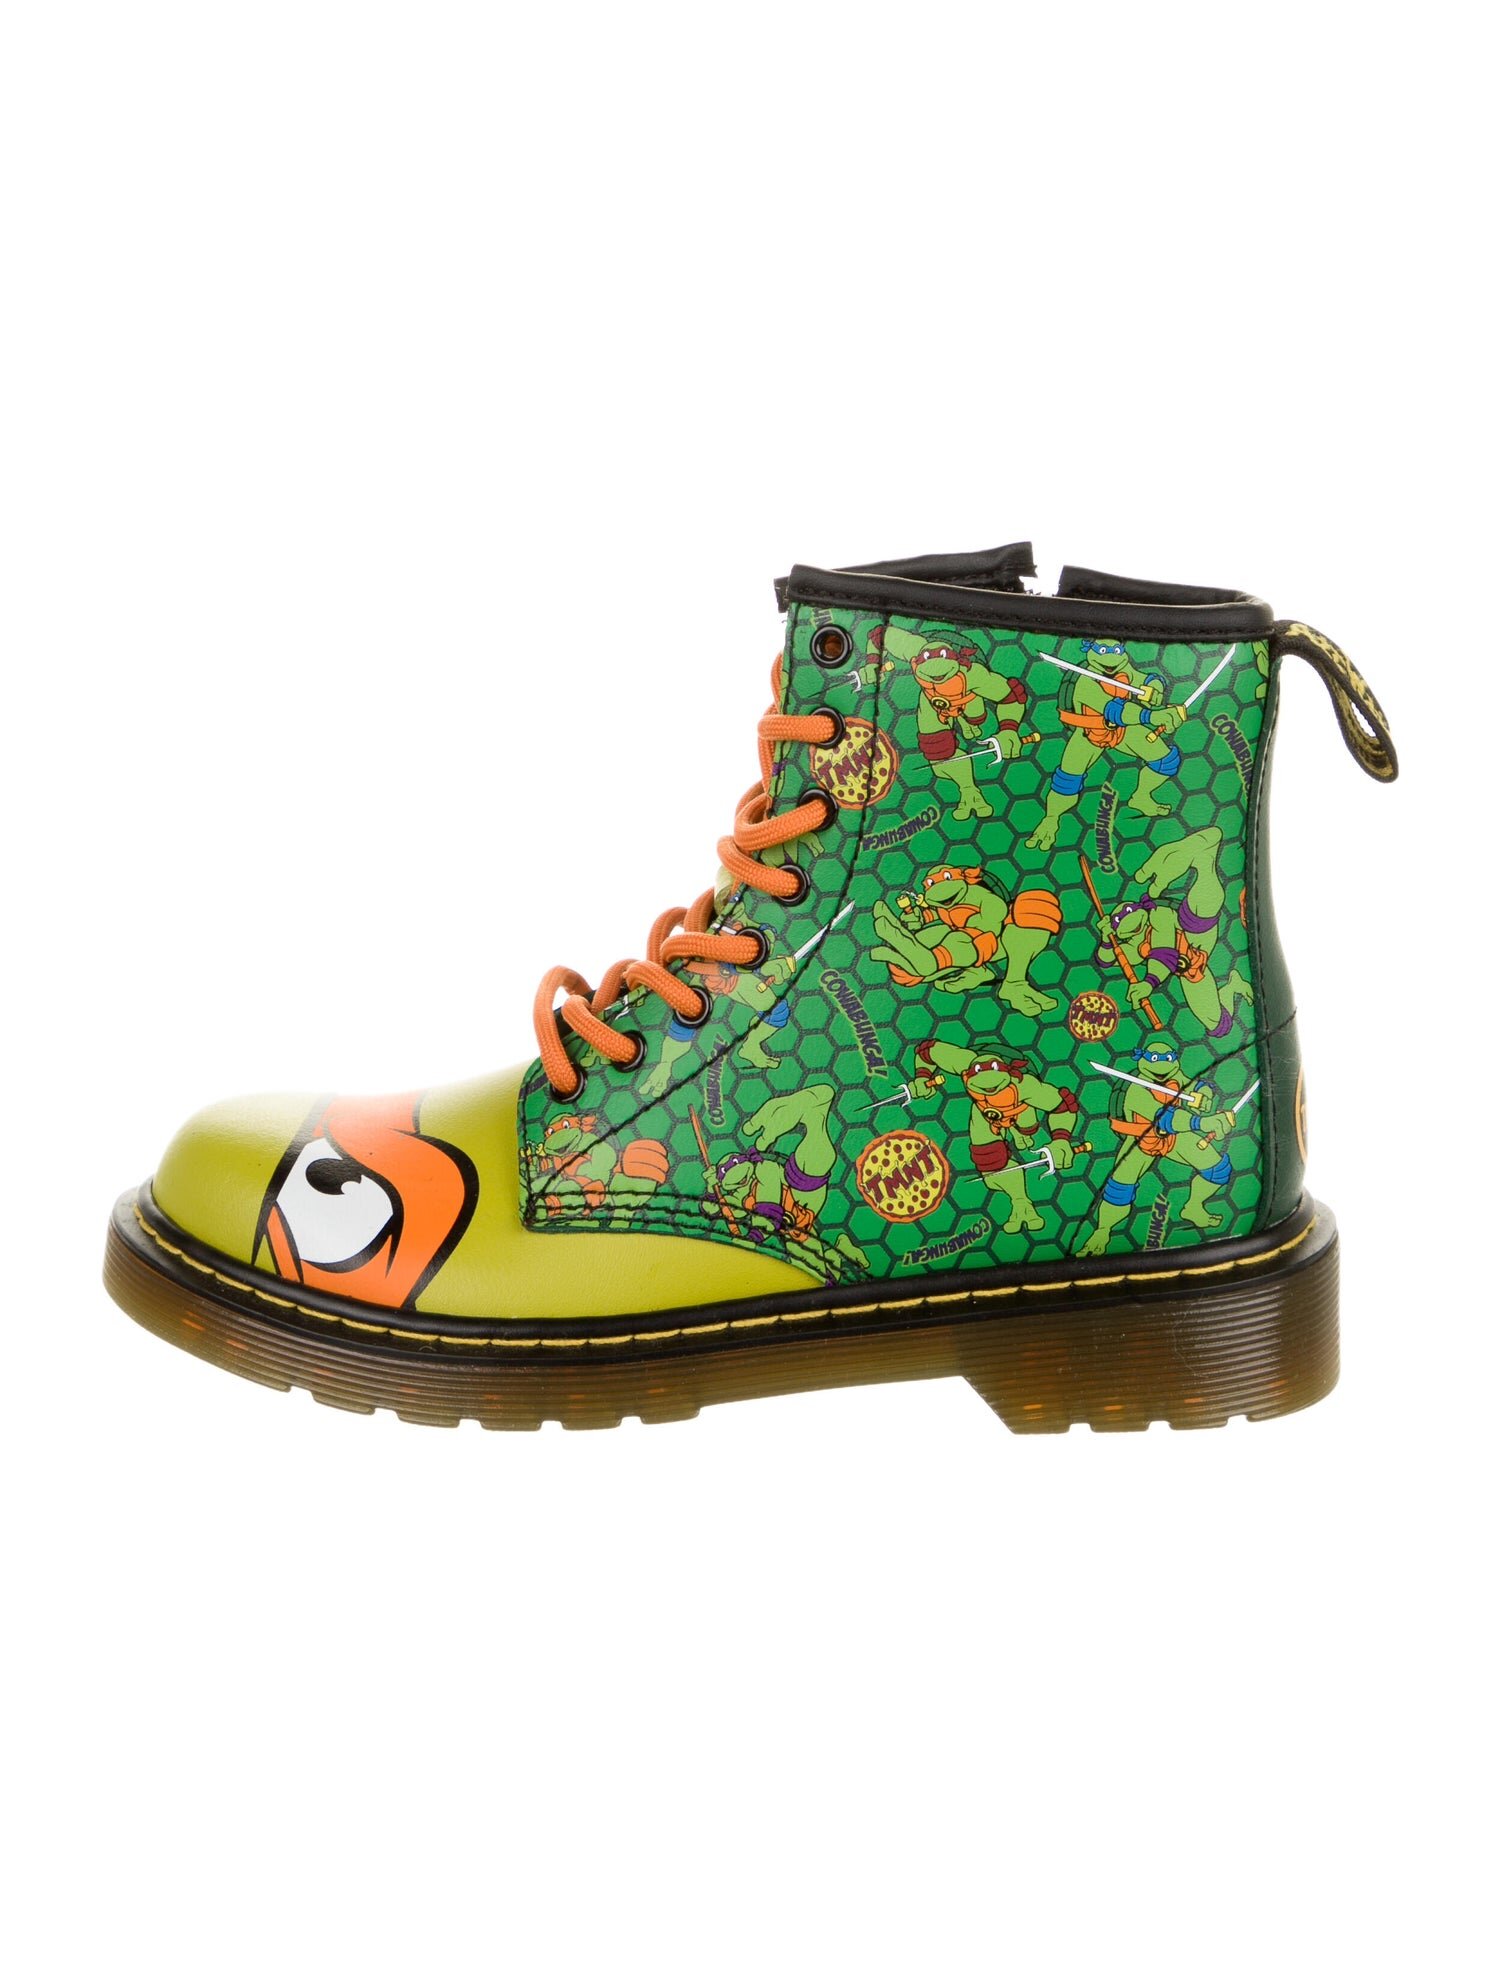 Mario's Dr. Martins TMNT Mikey Ankle Boots